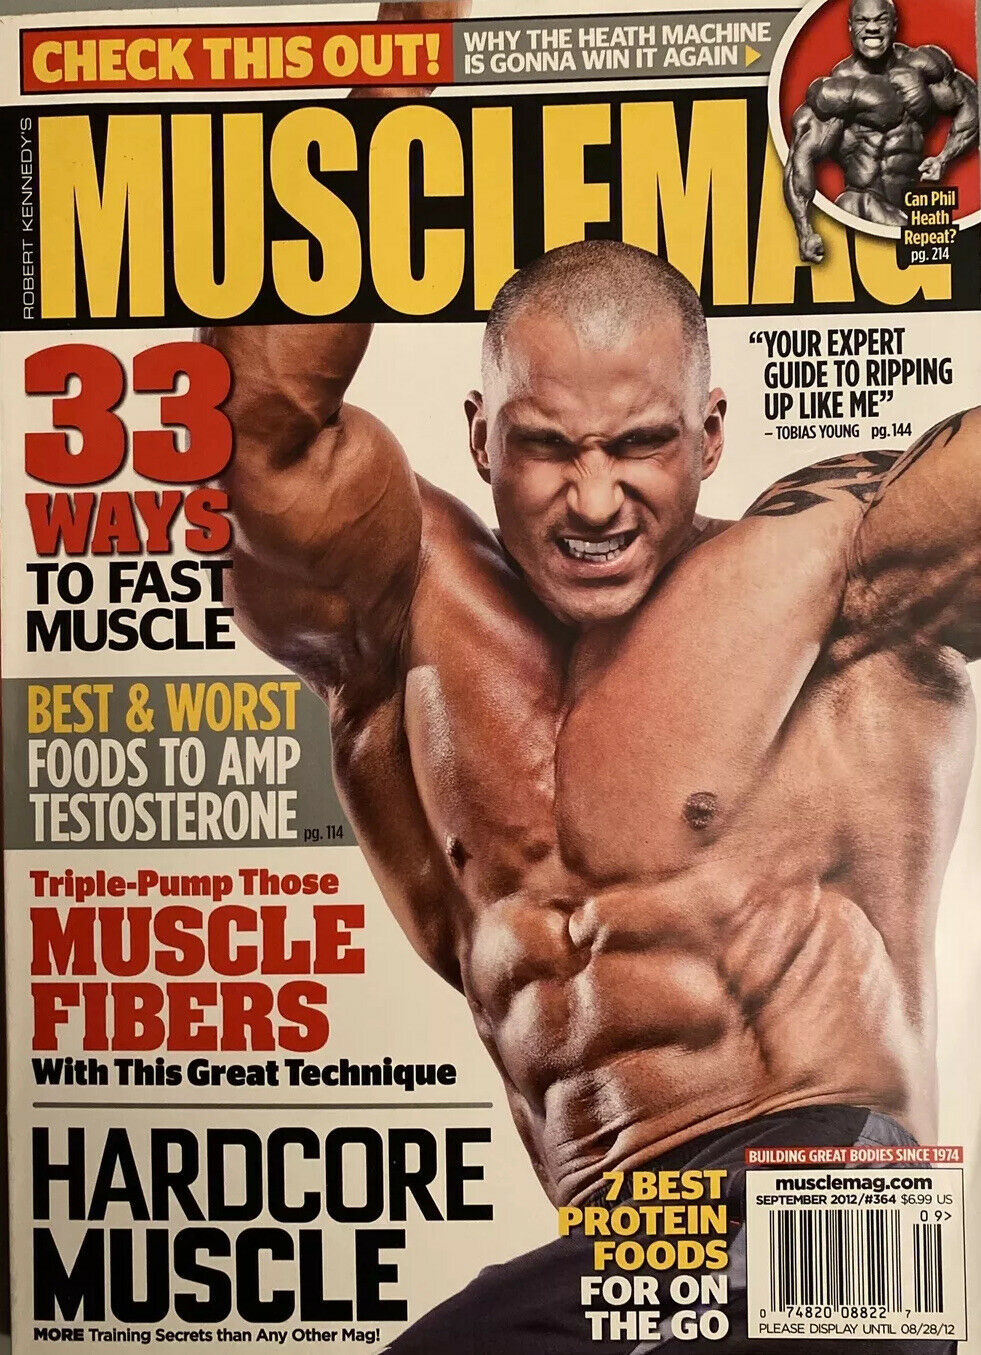 Muscle Mag September 2012 magazine back issue Muscle Mag magizine back copy Muscle Mag September 2012 Bodybuilding and Fitness Magazine Back Issue Published by Canadian Robert Kennedy and Founded in 1974. Check This Out! Why The Heath Machine Is Gonna Win It Again.